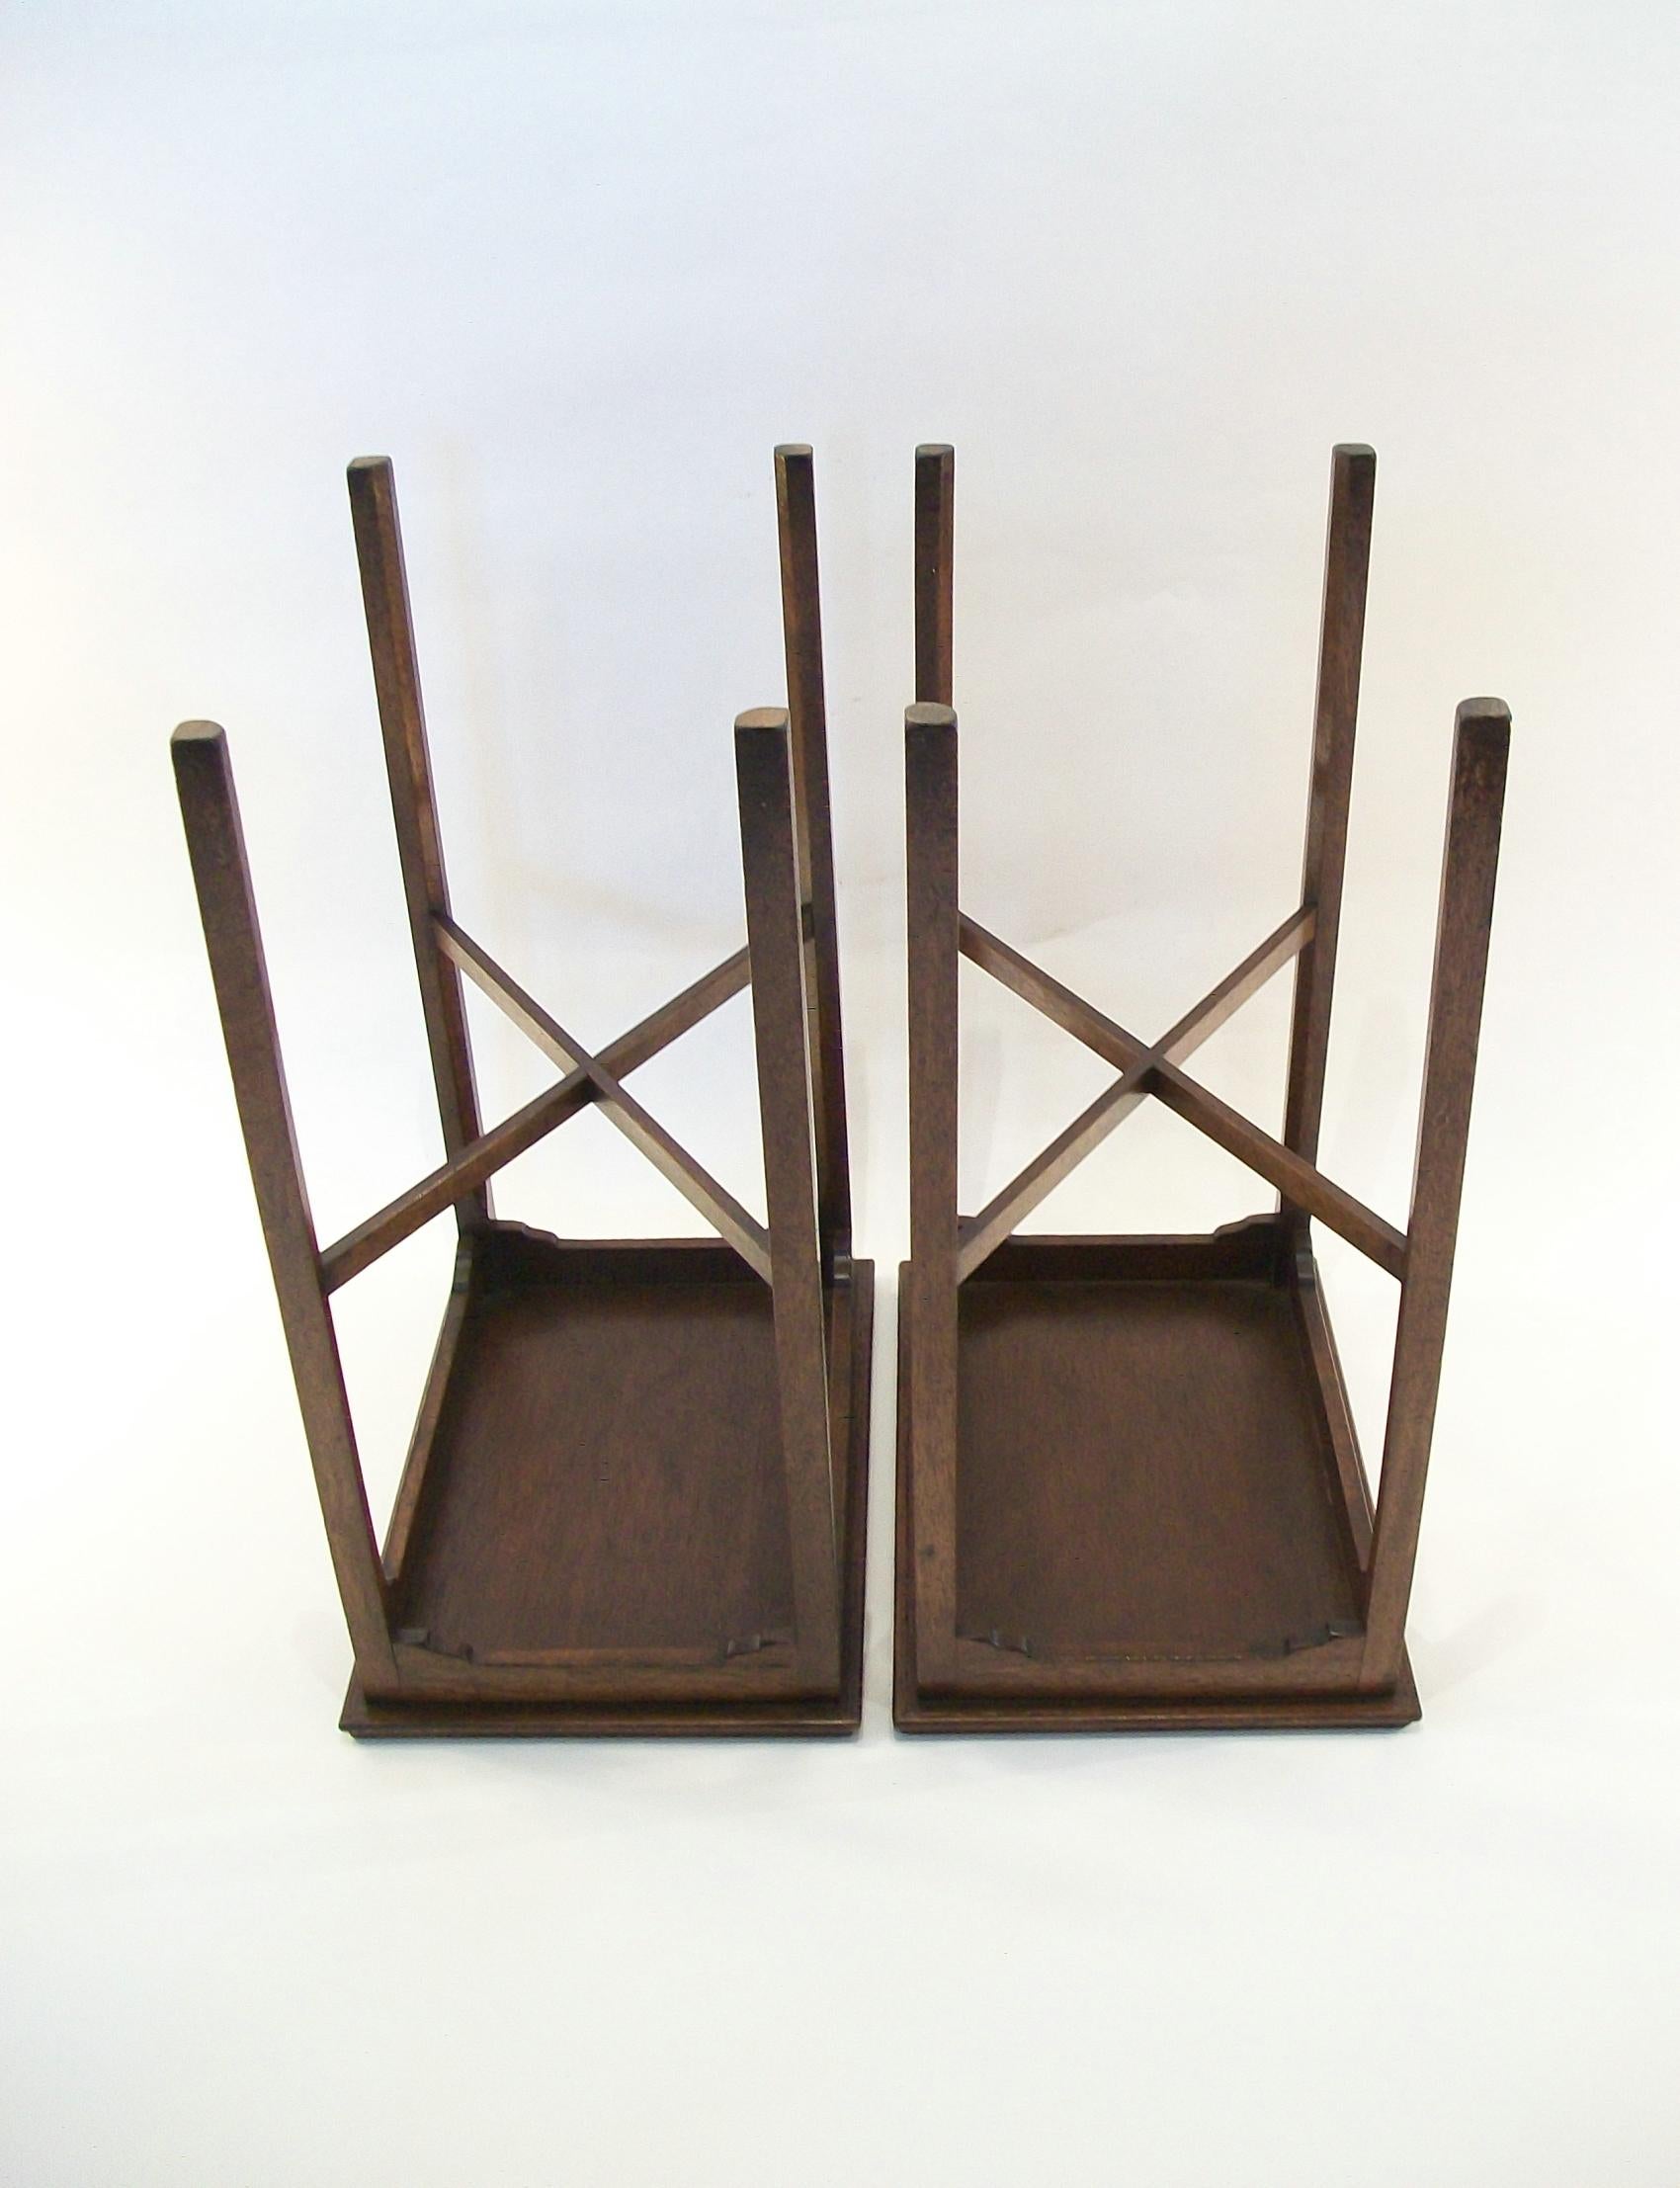 Fine Pair of Georgian Style Flamed Hardwood Side Tables - U.K. - Circa 1950's For Sale 3